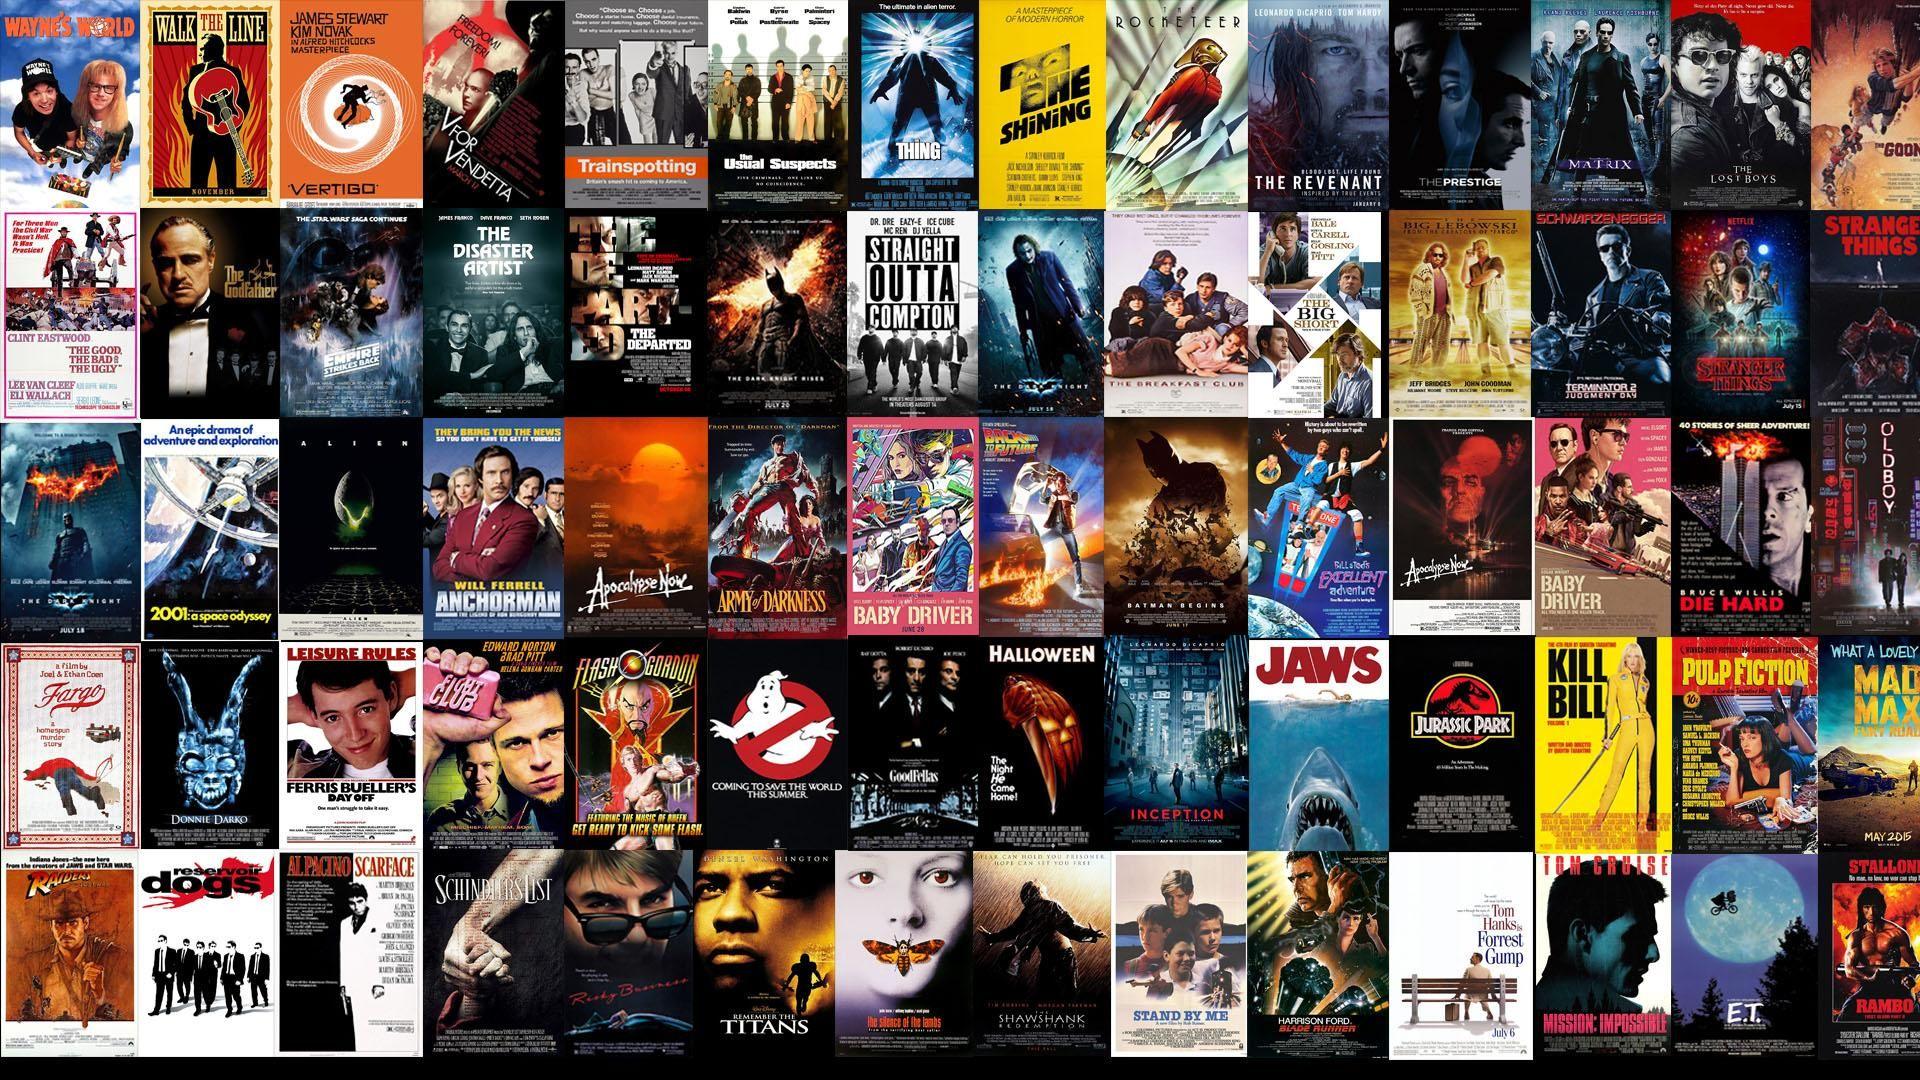 I made a wallpaper with all my favorite movie posters. Hope you